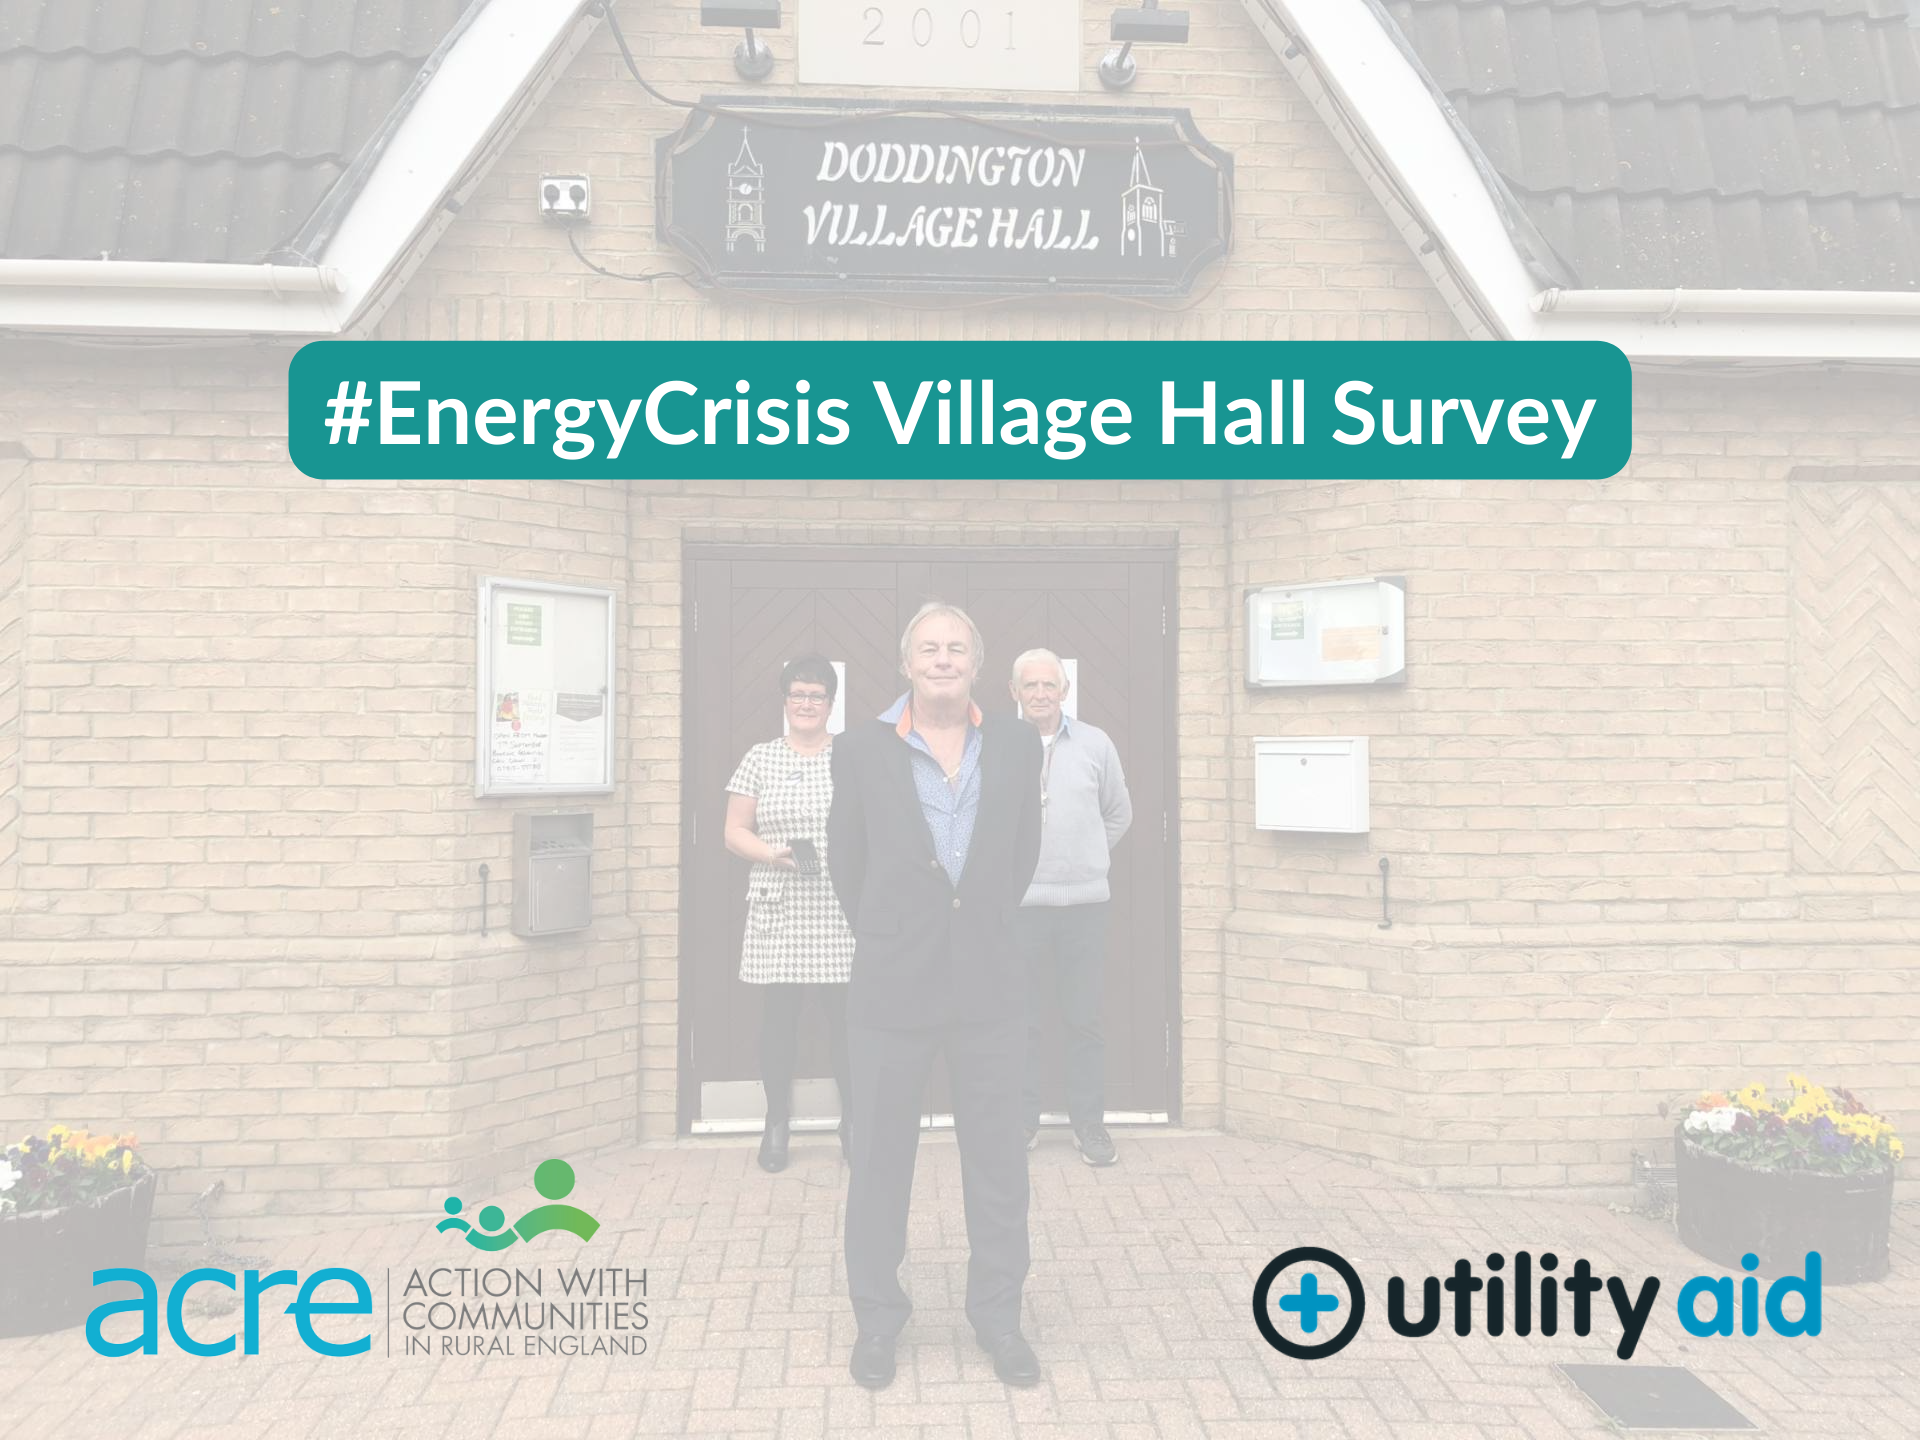 A picture of a village hall with an #energycrisis caption.